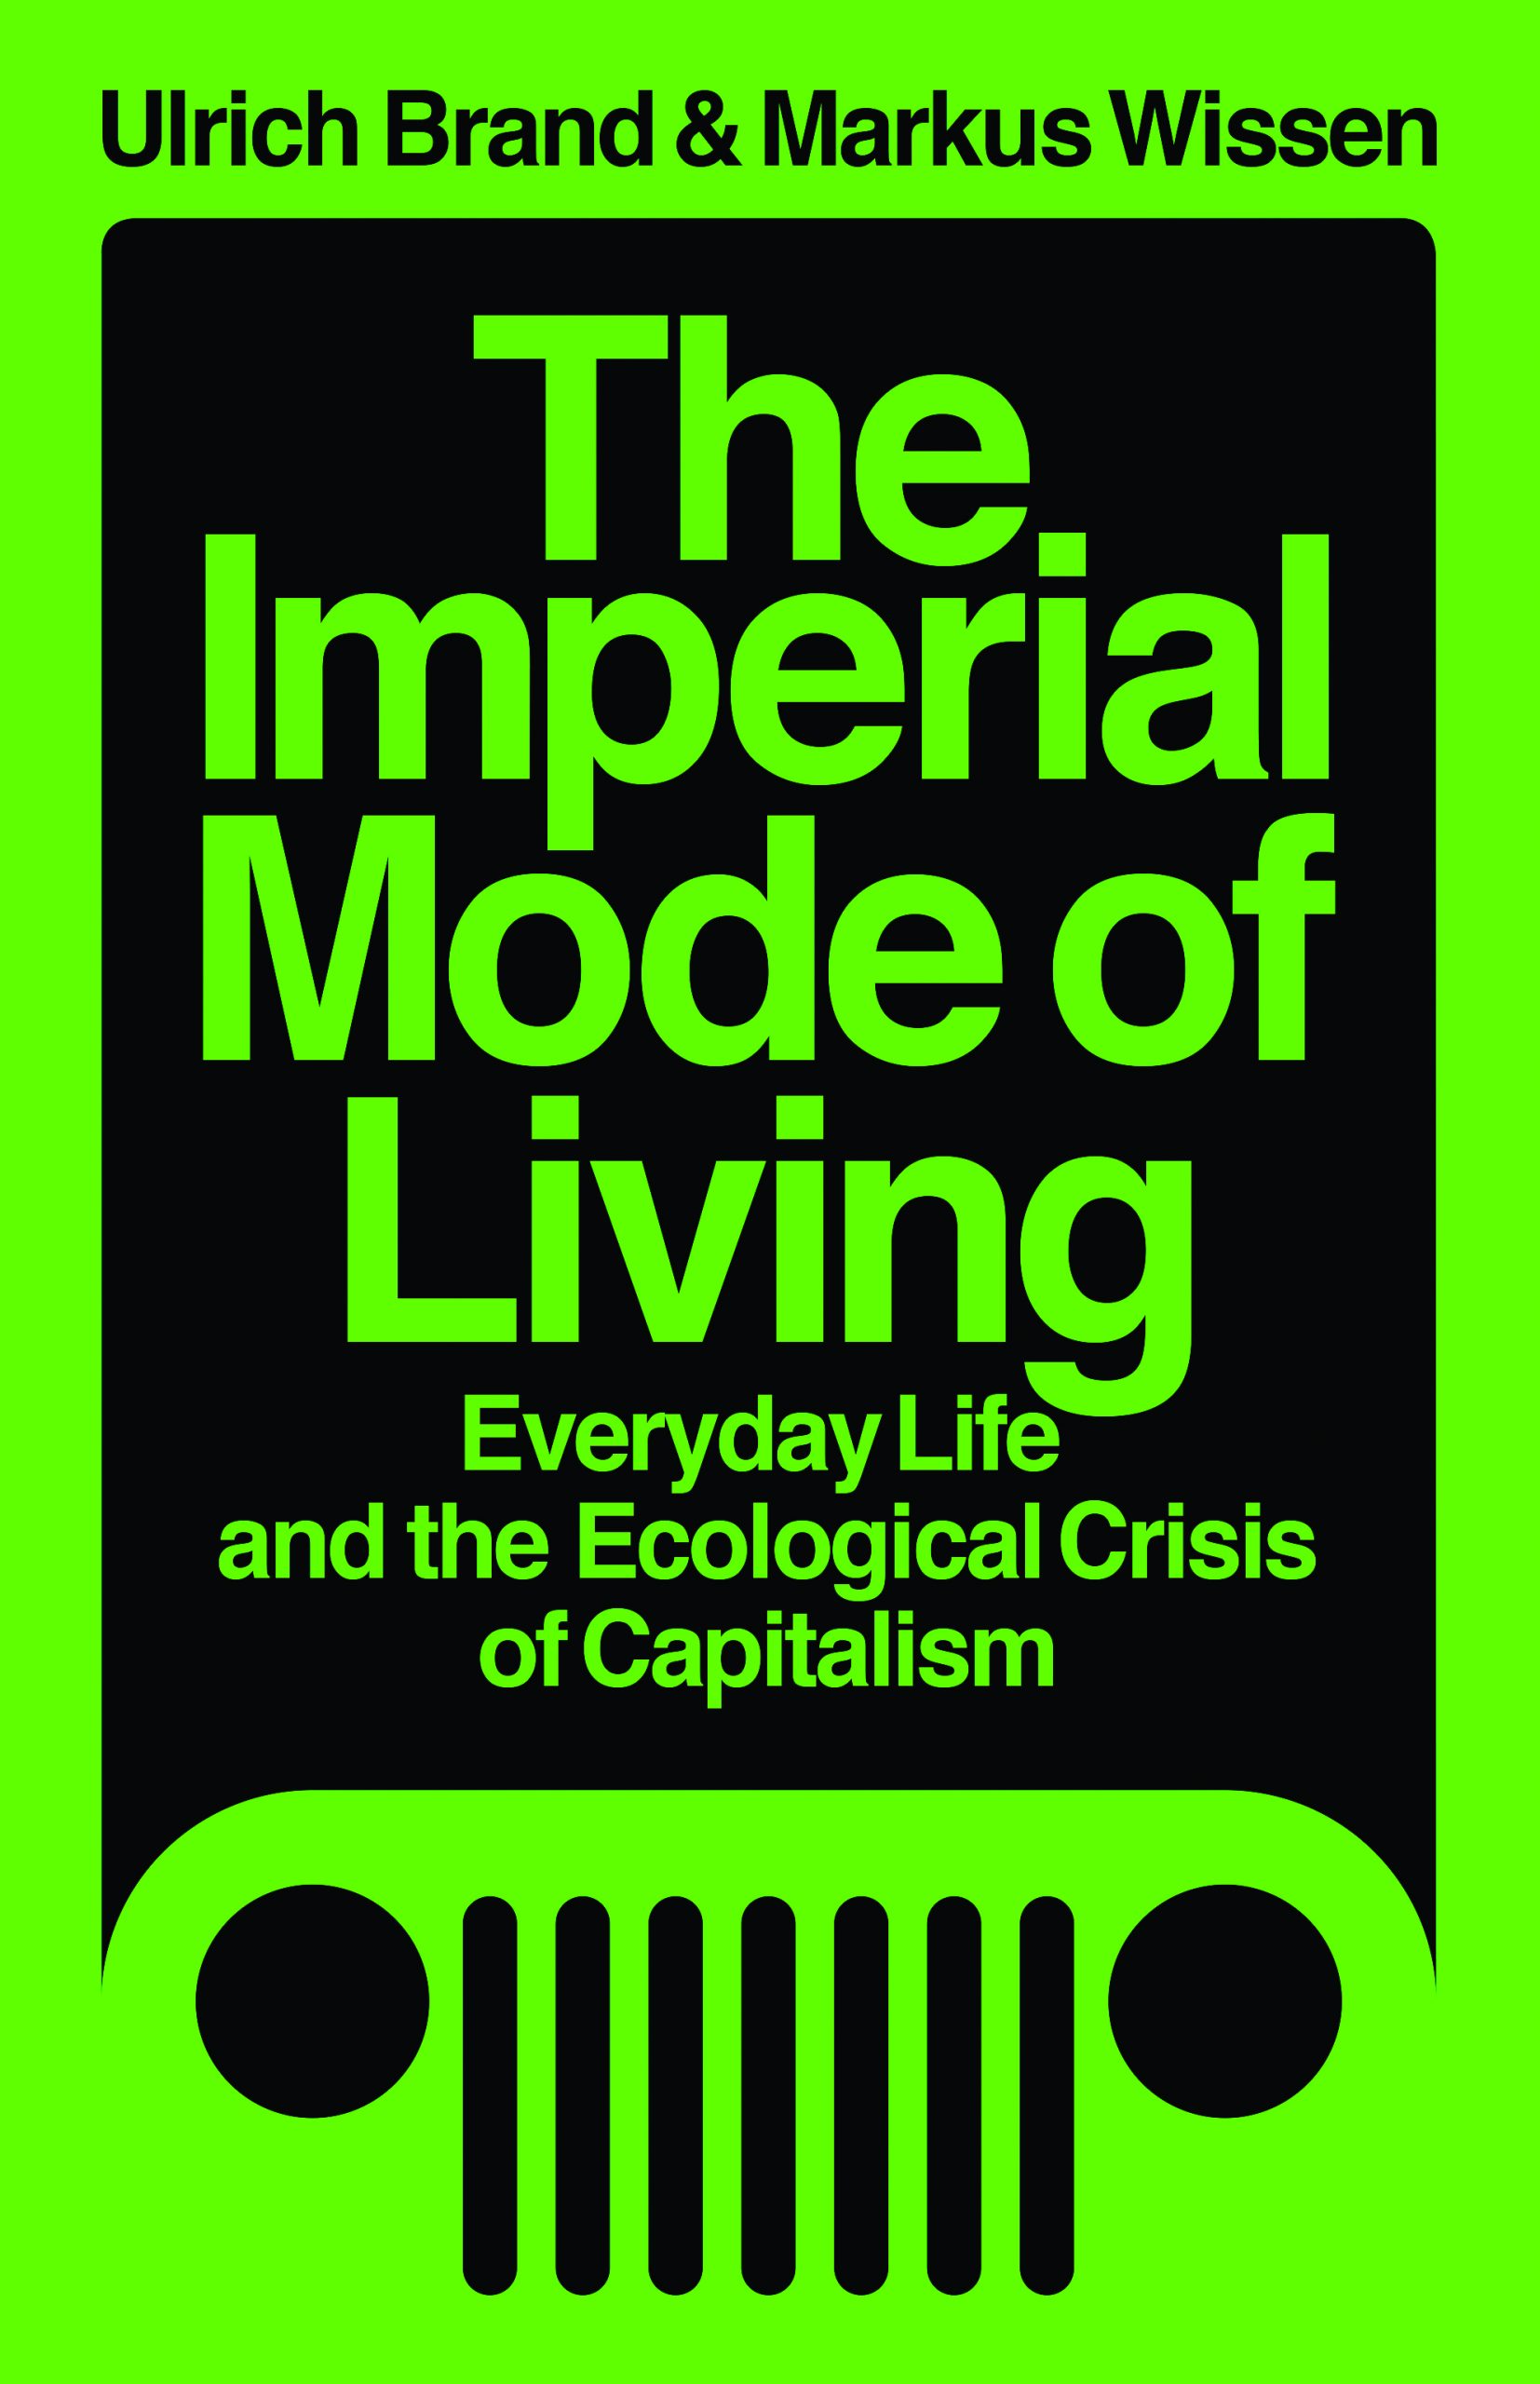 Everyday Life and the Ecological Crisis of Capitalism